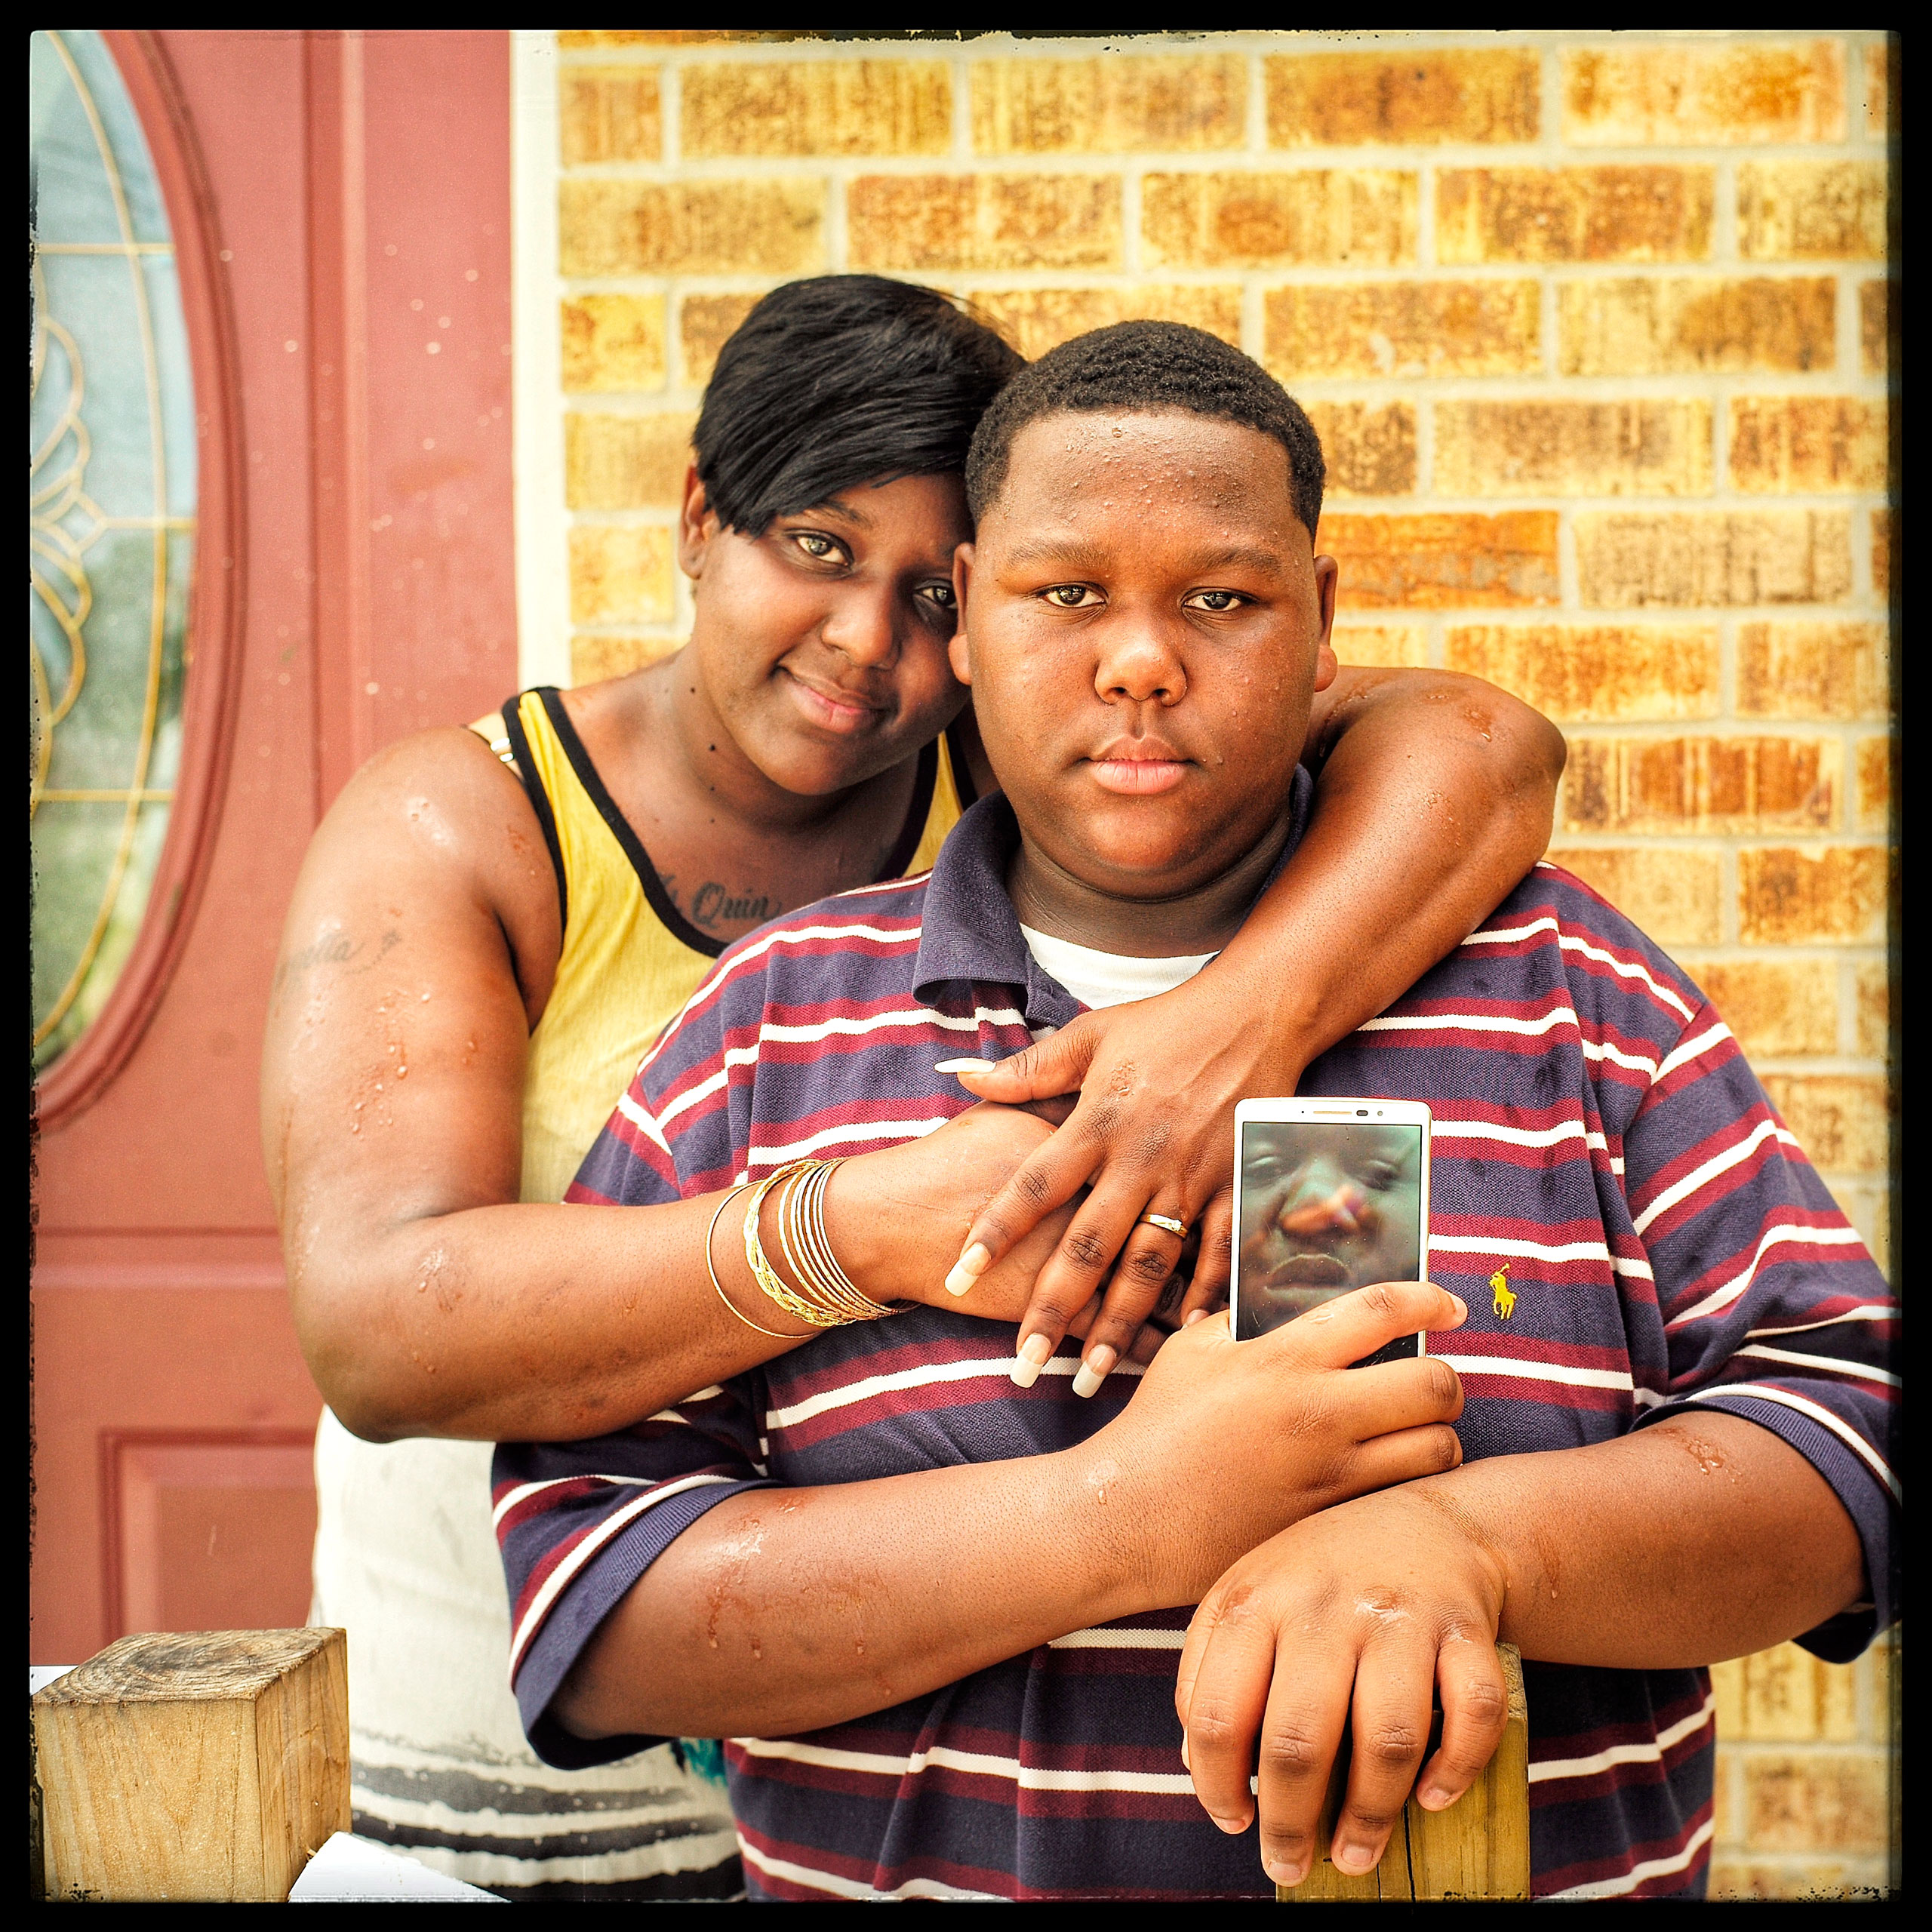 Cameron Sterling and his mother Quinyetta, in Baton Rouge, La., on July 12. Cameron, 15, holds a composite image he made of himself and his father Alton, who was fatally shot by police on July 5. “The police took his phone, so all the pictures he took are gone,” Cameron says. “Today has been a peaceful day so far. There was less drama today.” (Radcliffe Roye for TIME)